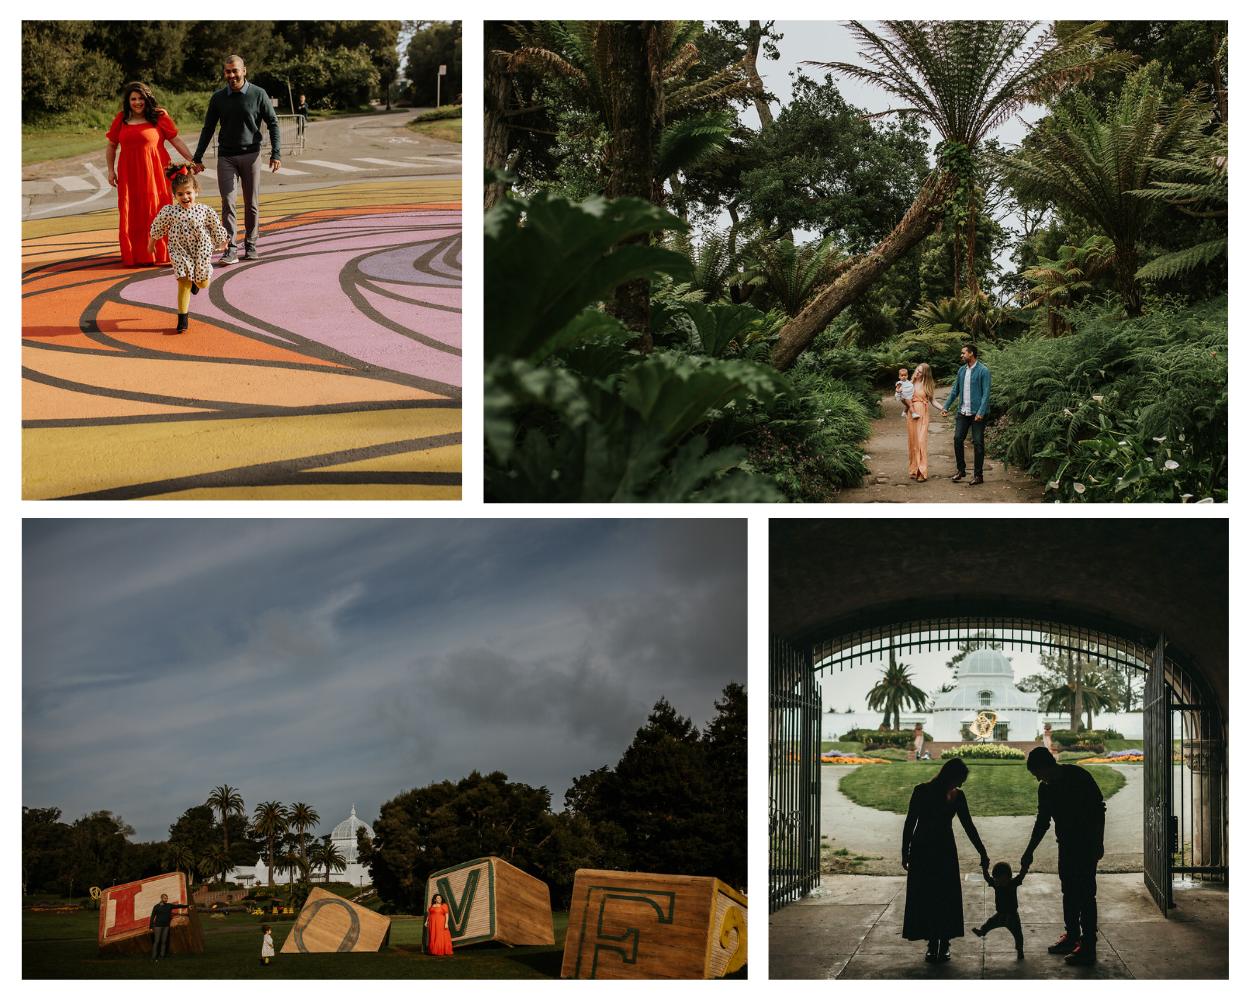 Collage of family photography sessions on the JFK Promenade in Golden Gate Park